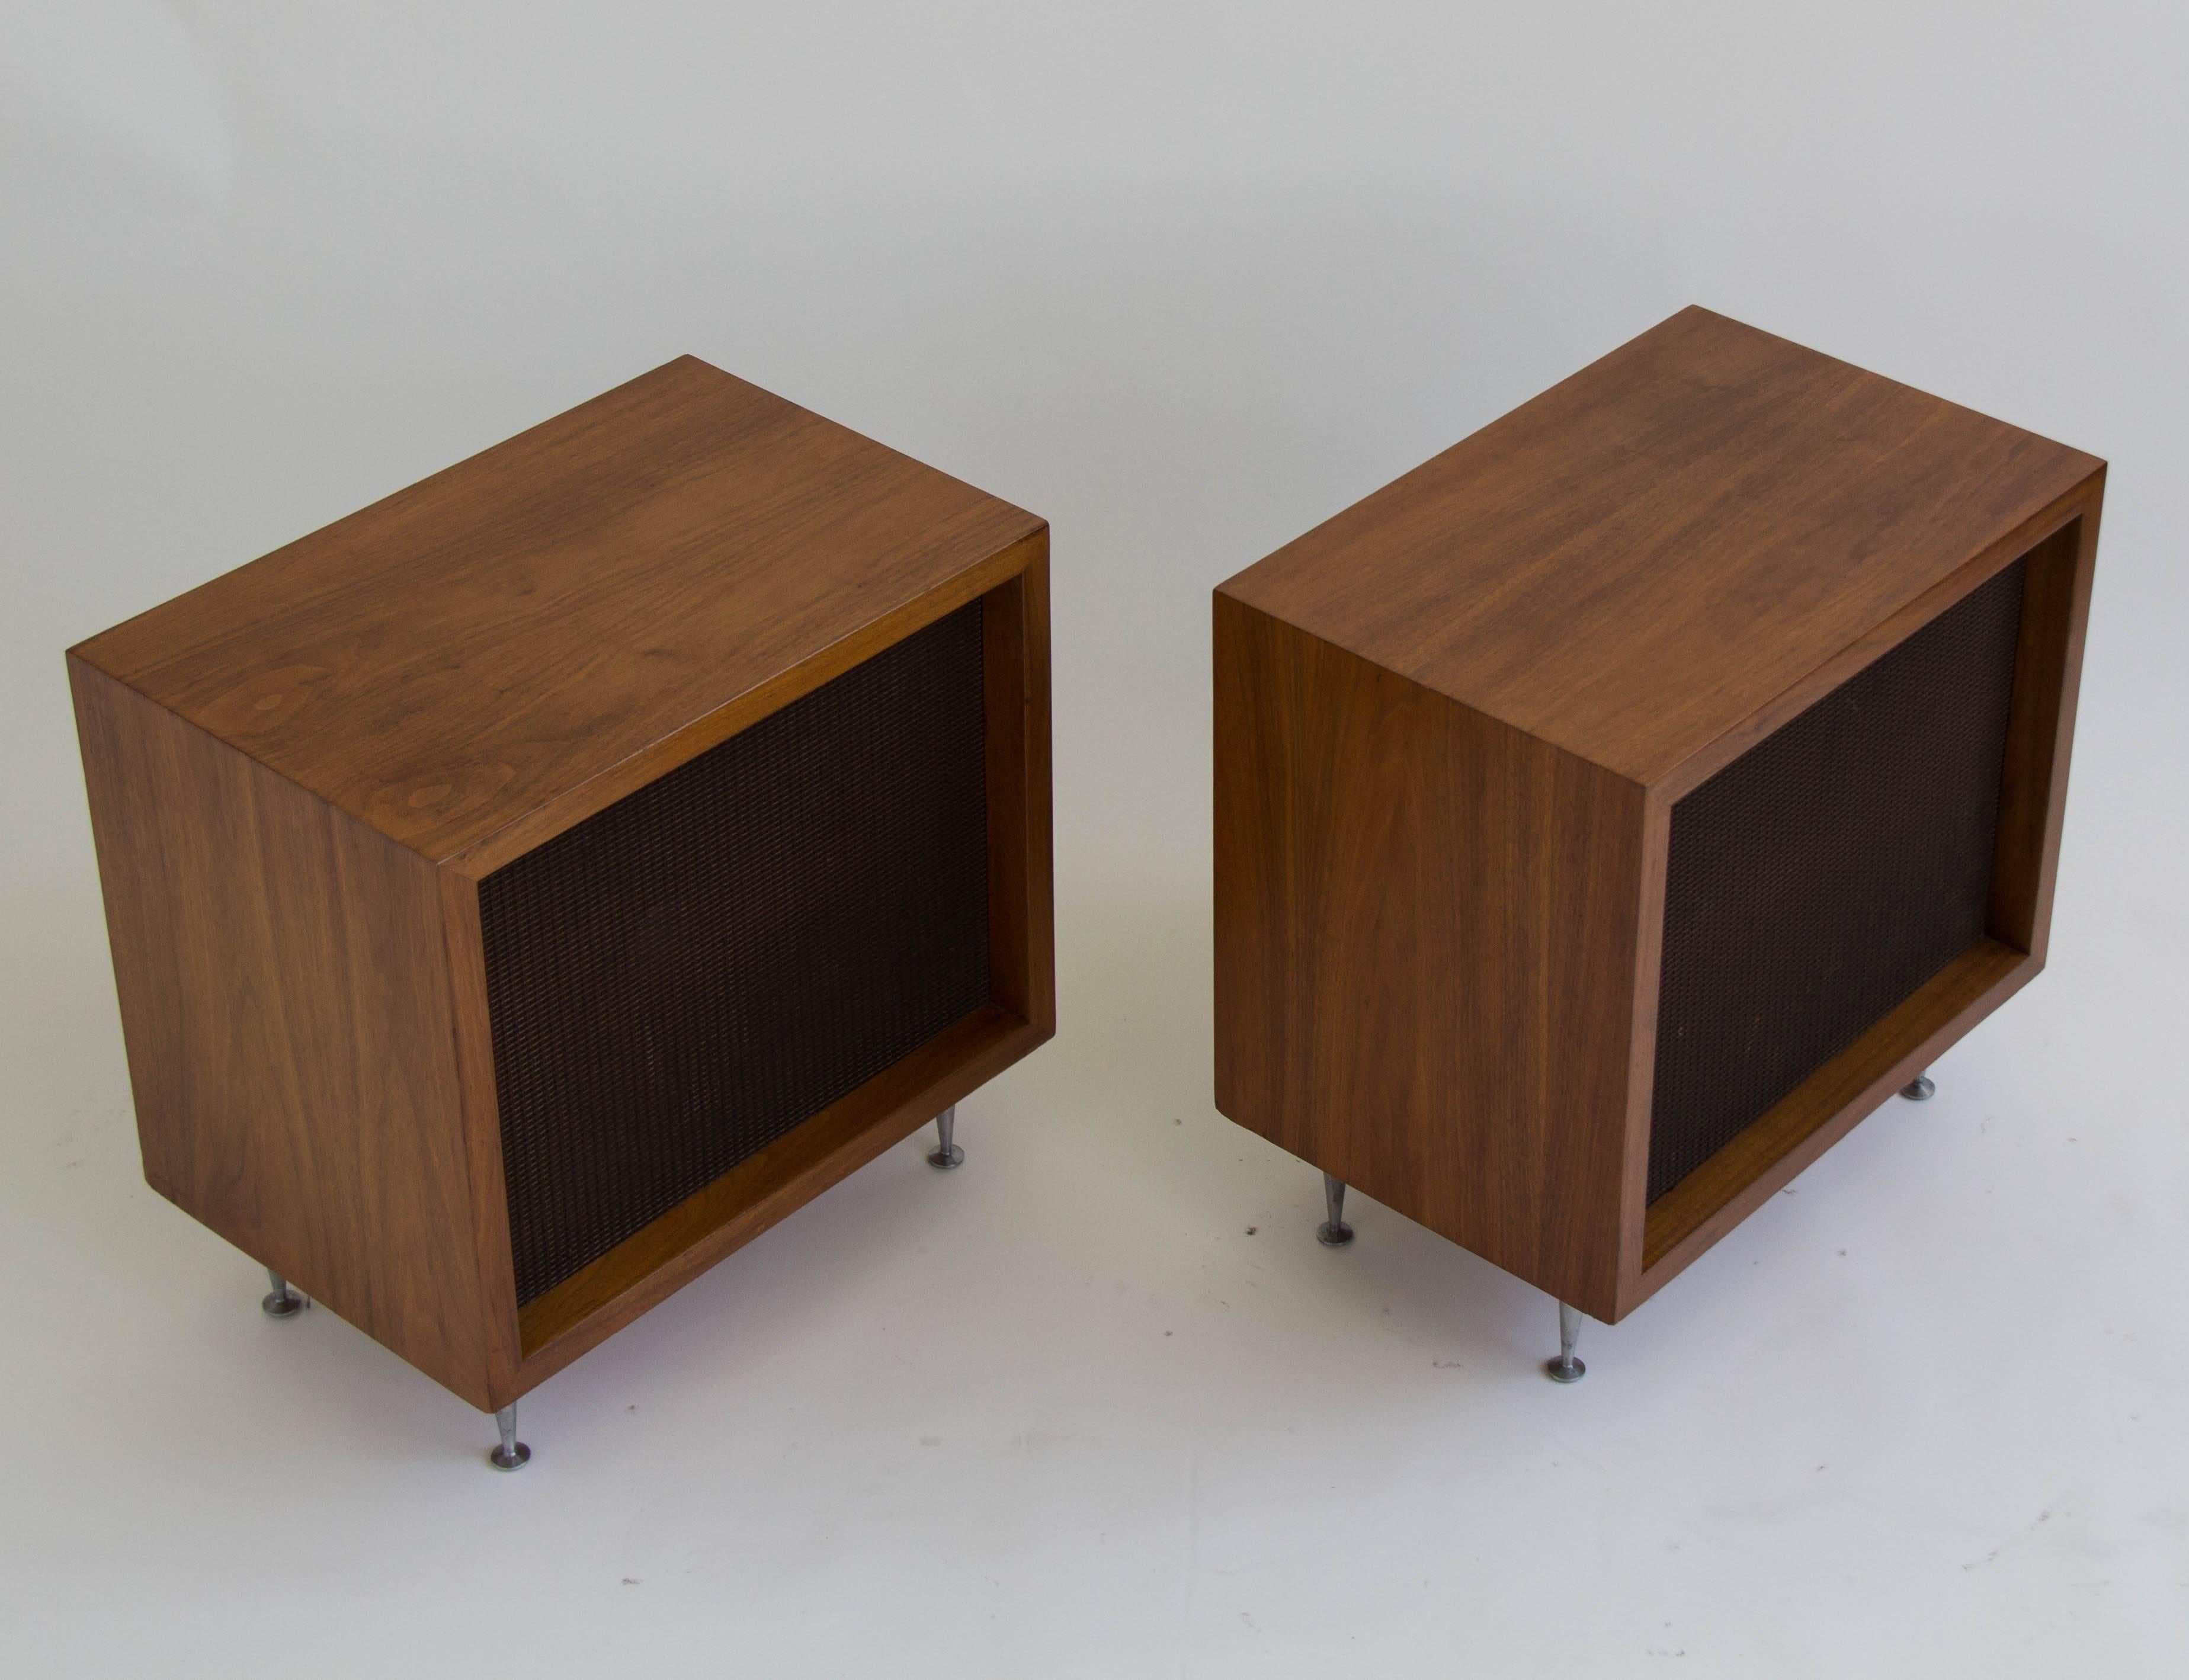 A pair of JBL (James B Lansing) speakers in Baron C38 walnut cases designed by Alvin Lustig. Each speaker sits a top four brushed aluminum legs with flat glides. Back panel hardware bears the JBL name. Speakers are in good working order.